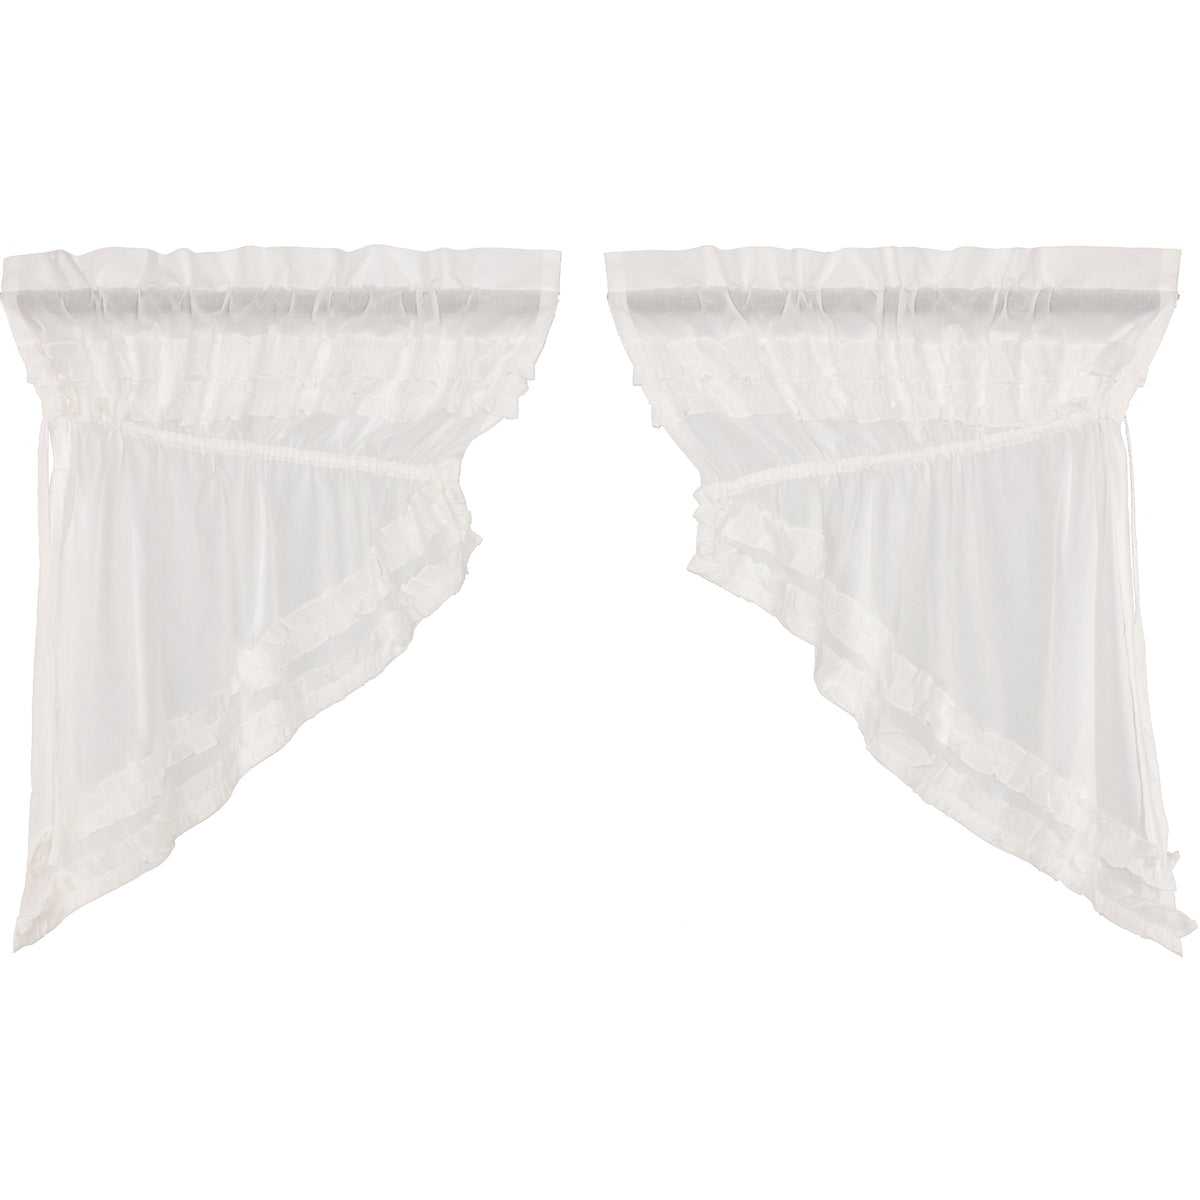 April & Olive White Ruffled Sheer Petticoat Prairie Swag Set of 2 36x36x18 By VHC Brands